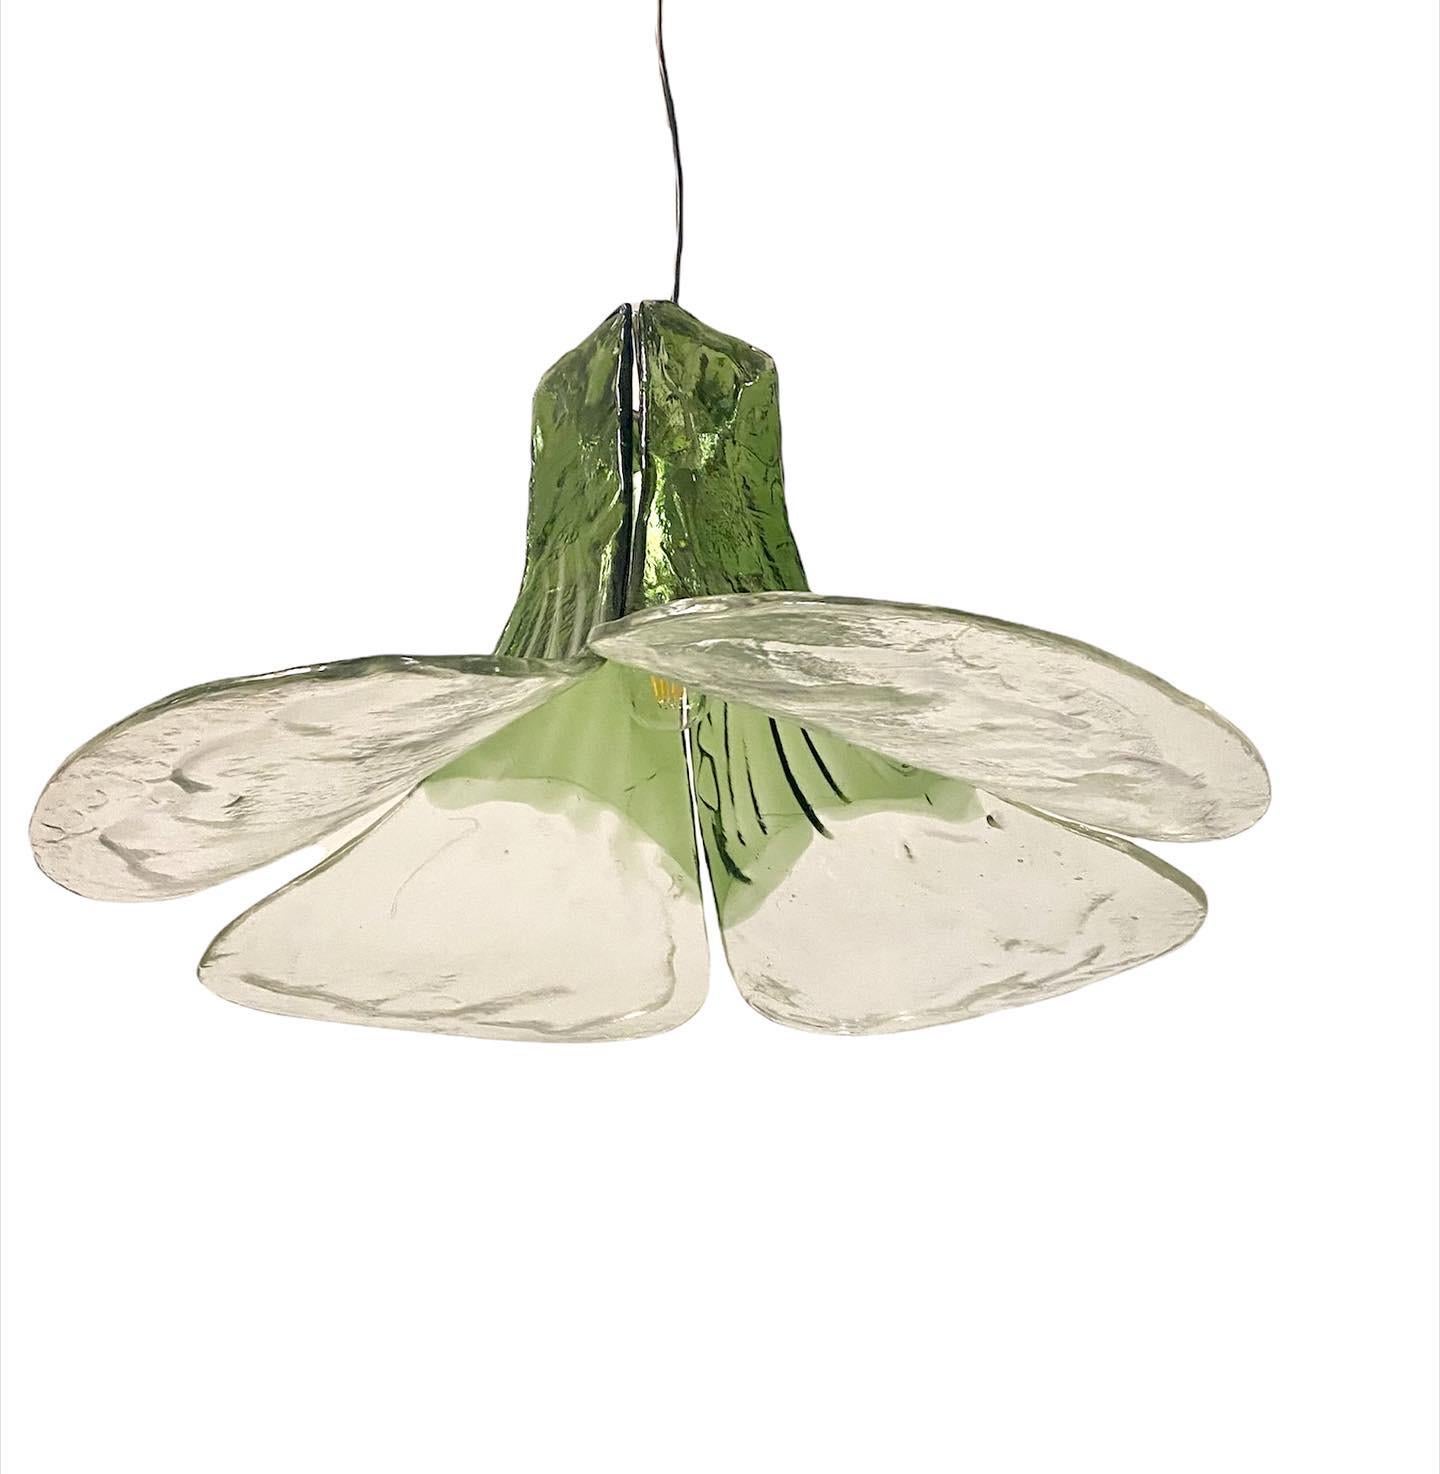 Beautiful hanging lamp from the 1970s.
Glasses manufactured by AV Mazzega and designed by Carlo Nason
Perfect working condition.
The four discs consist of green/clear glass and are hanging on the metal suspension.
The lamp is on a steel cable